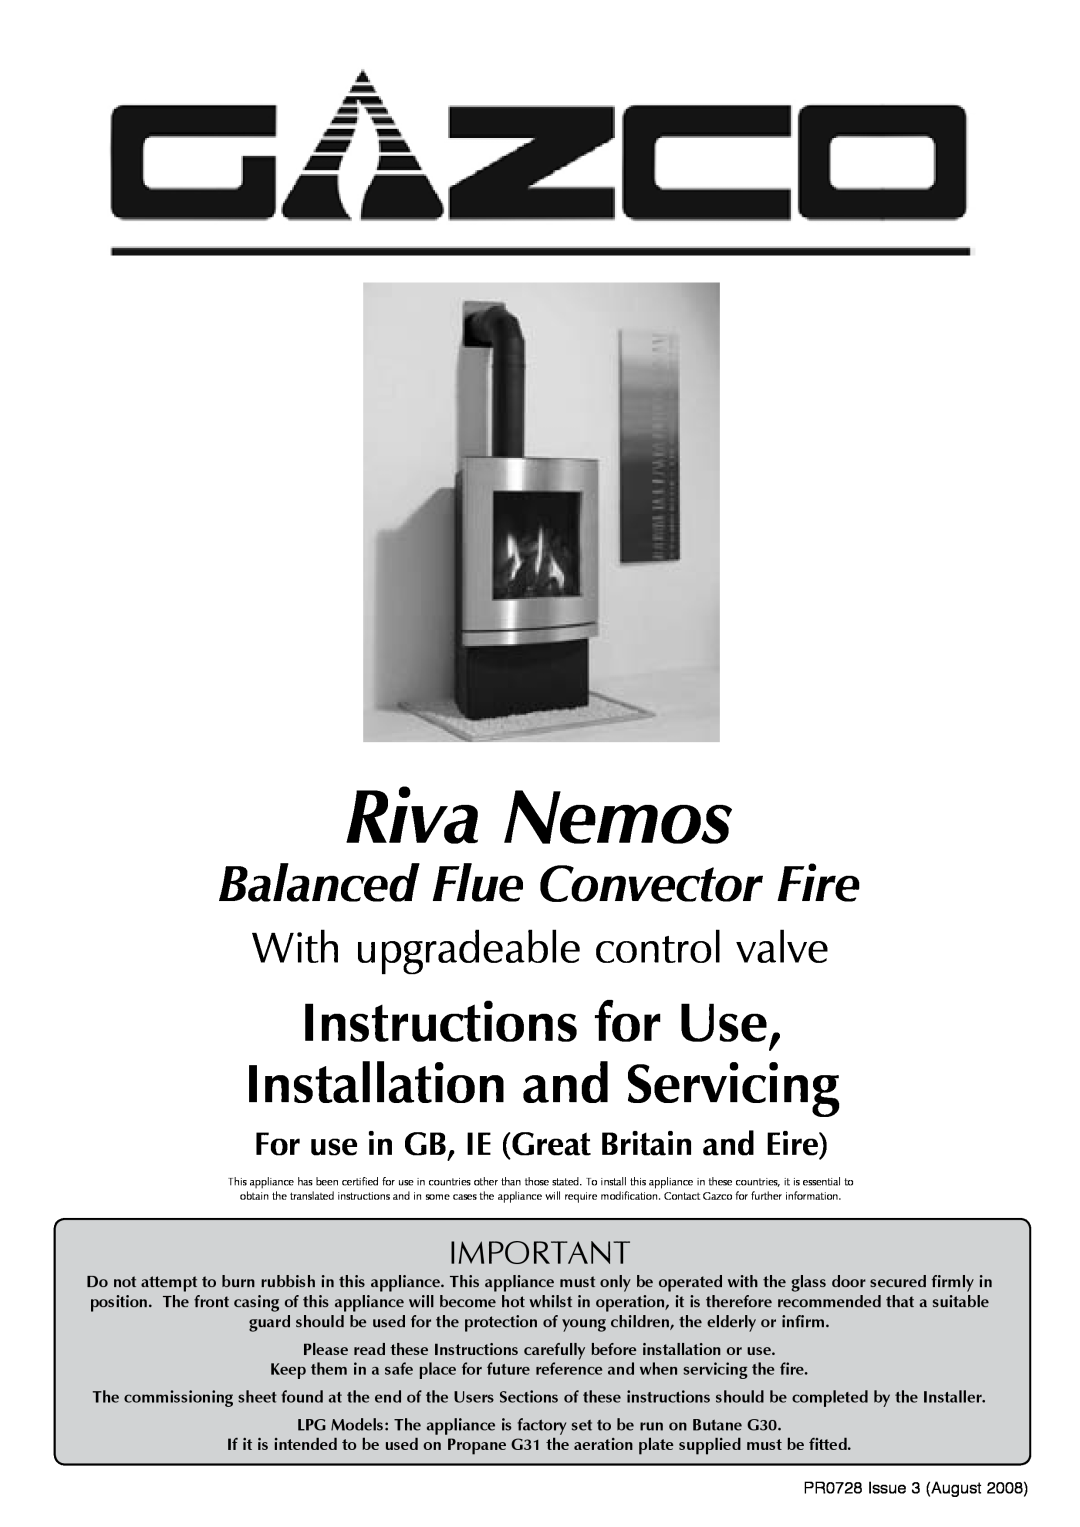 Stovax P8627 BS, P8627 MA manual Riva Nemos, Instructions for Use Installation and Servicing, Balanced Flue Convector Fire 